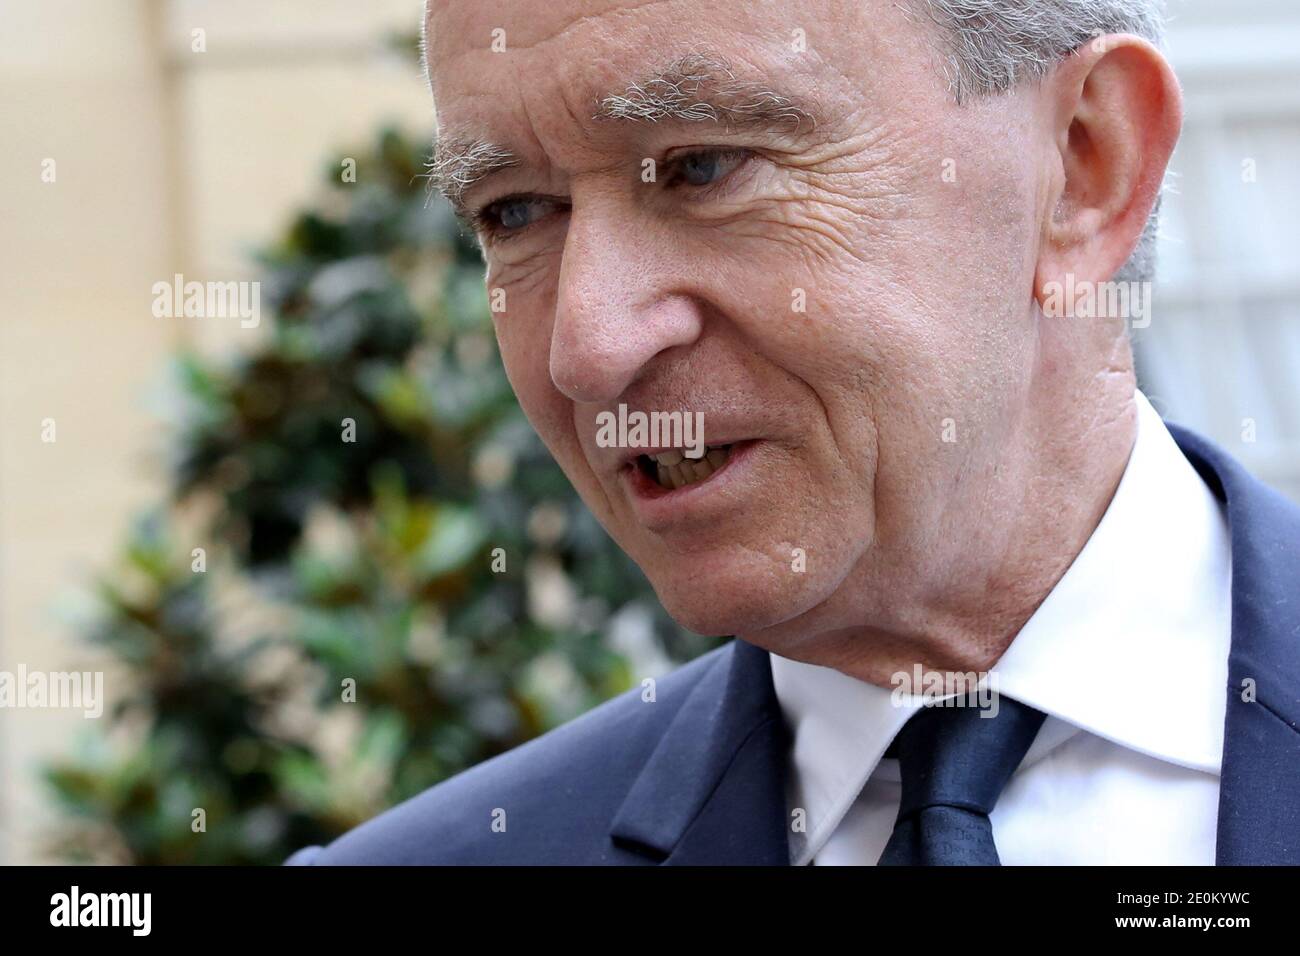 BERNARD ARNAULT, LVMH CEO, AND PIERRE GODE, VICE-PRESIDENT OF THE LOUIS  VUITTON MOET HENNESSY GROUP, Stock Photo, Picture And Rights Managed Image.  Pic. GPT-SG002455